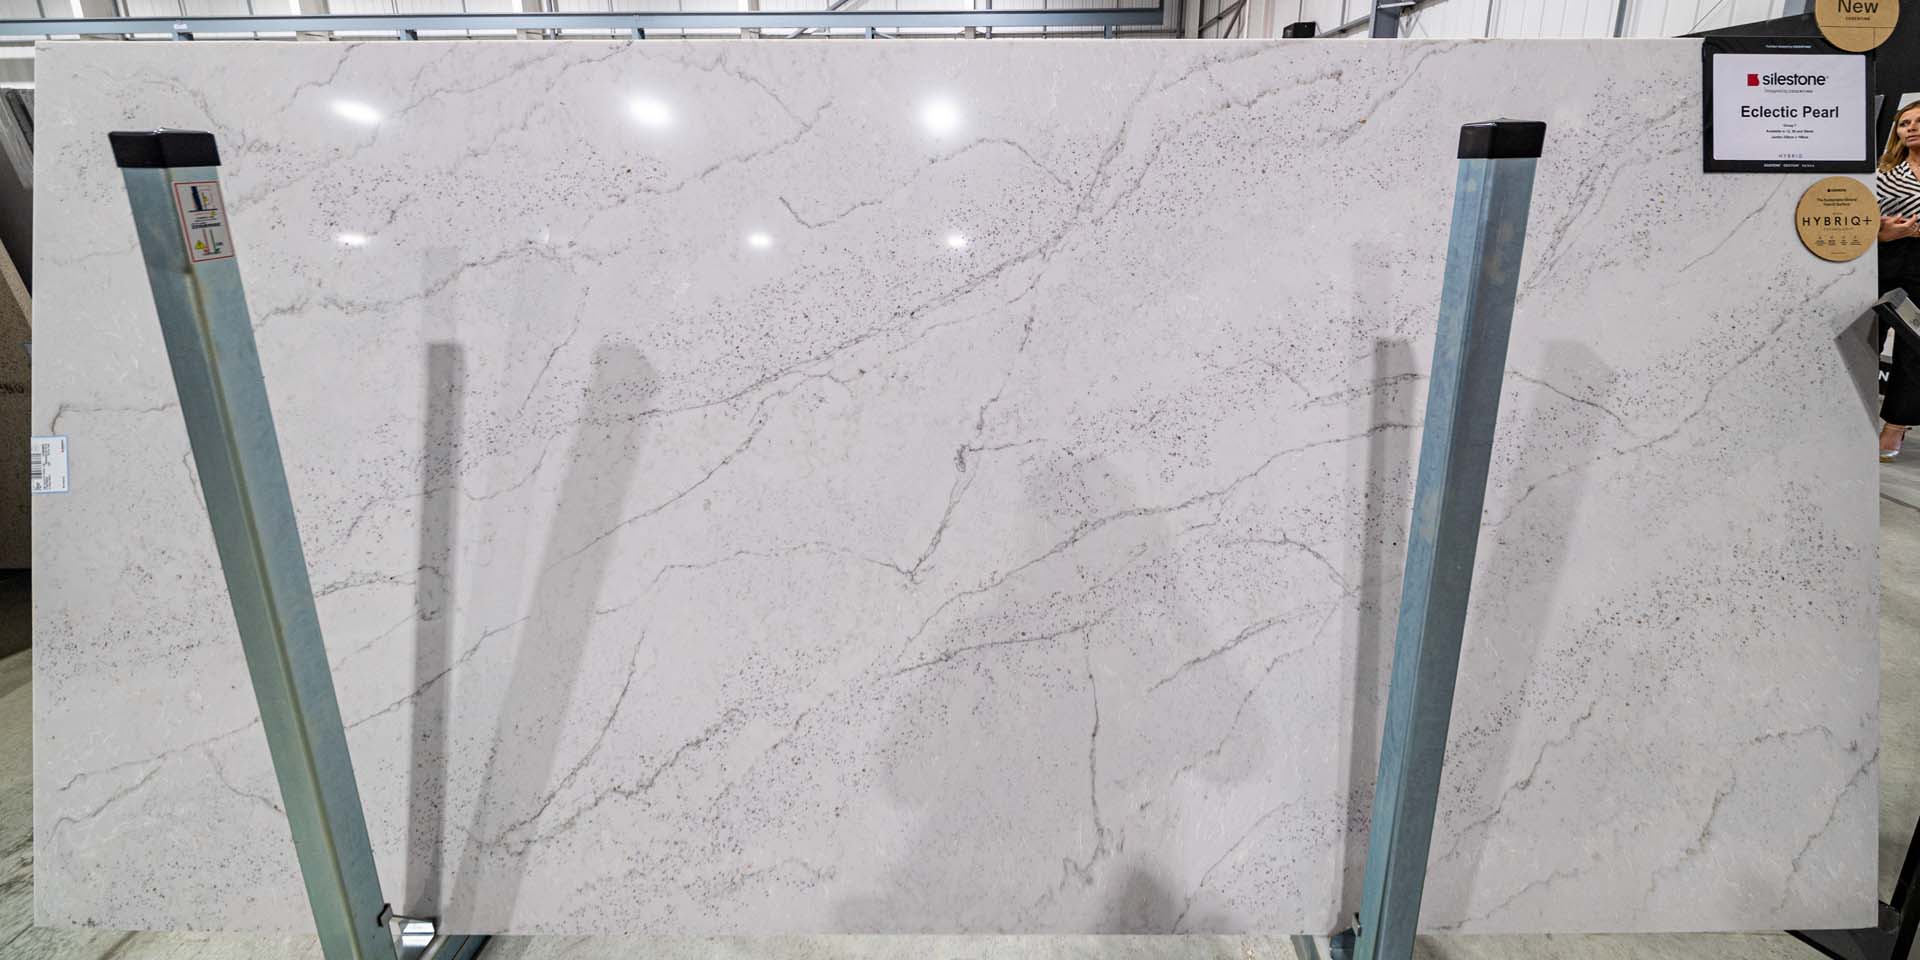 Eclectic Pearl slab image Silestone Le Chic Launch